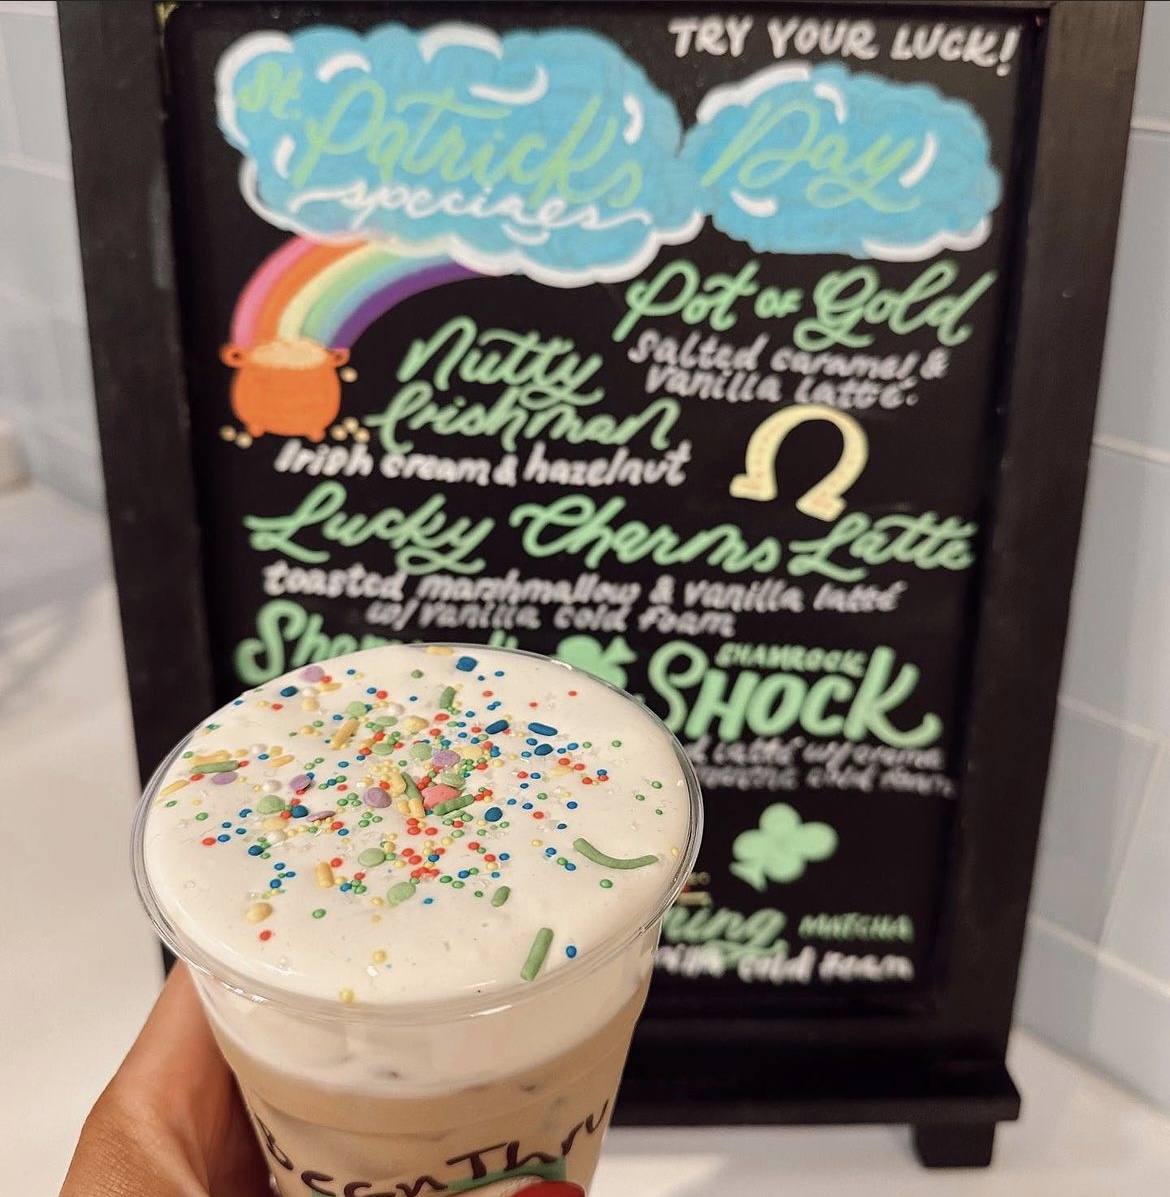 A photo of someone holding a BeanThru St. Patrick's Day themed iced coffee in front of a sign describing their holiday specials.